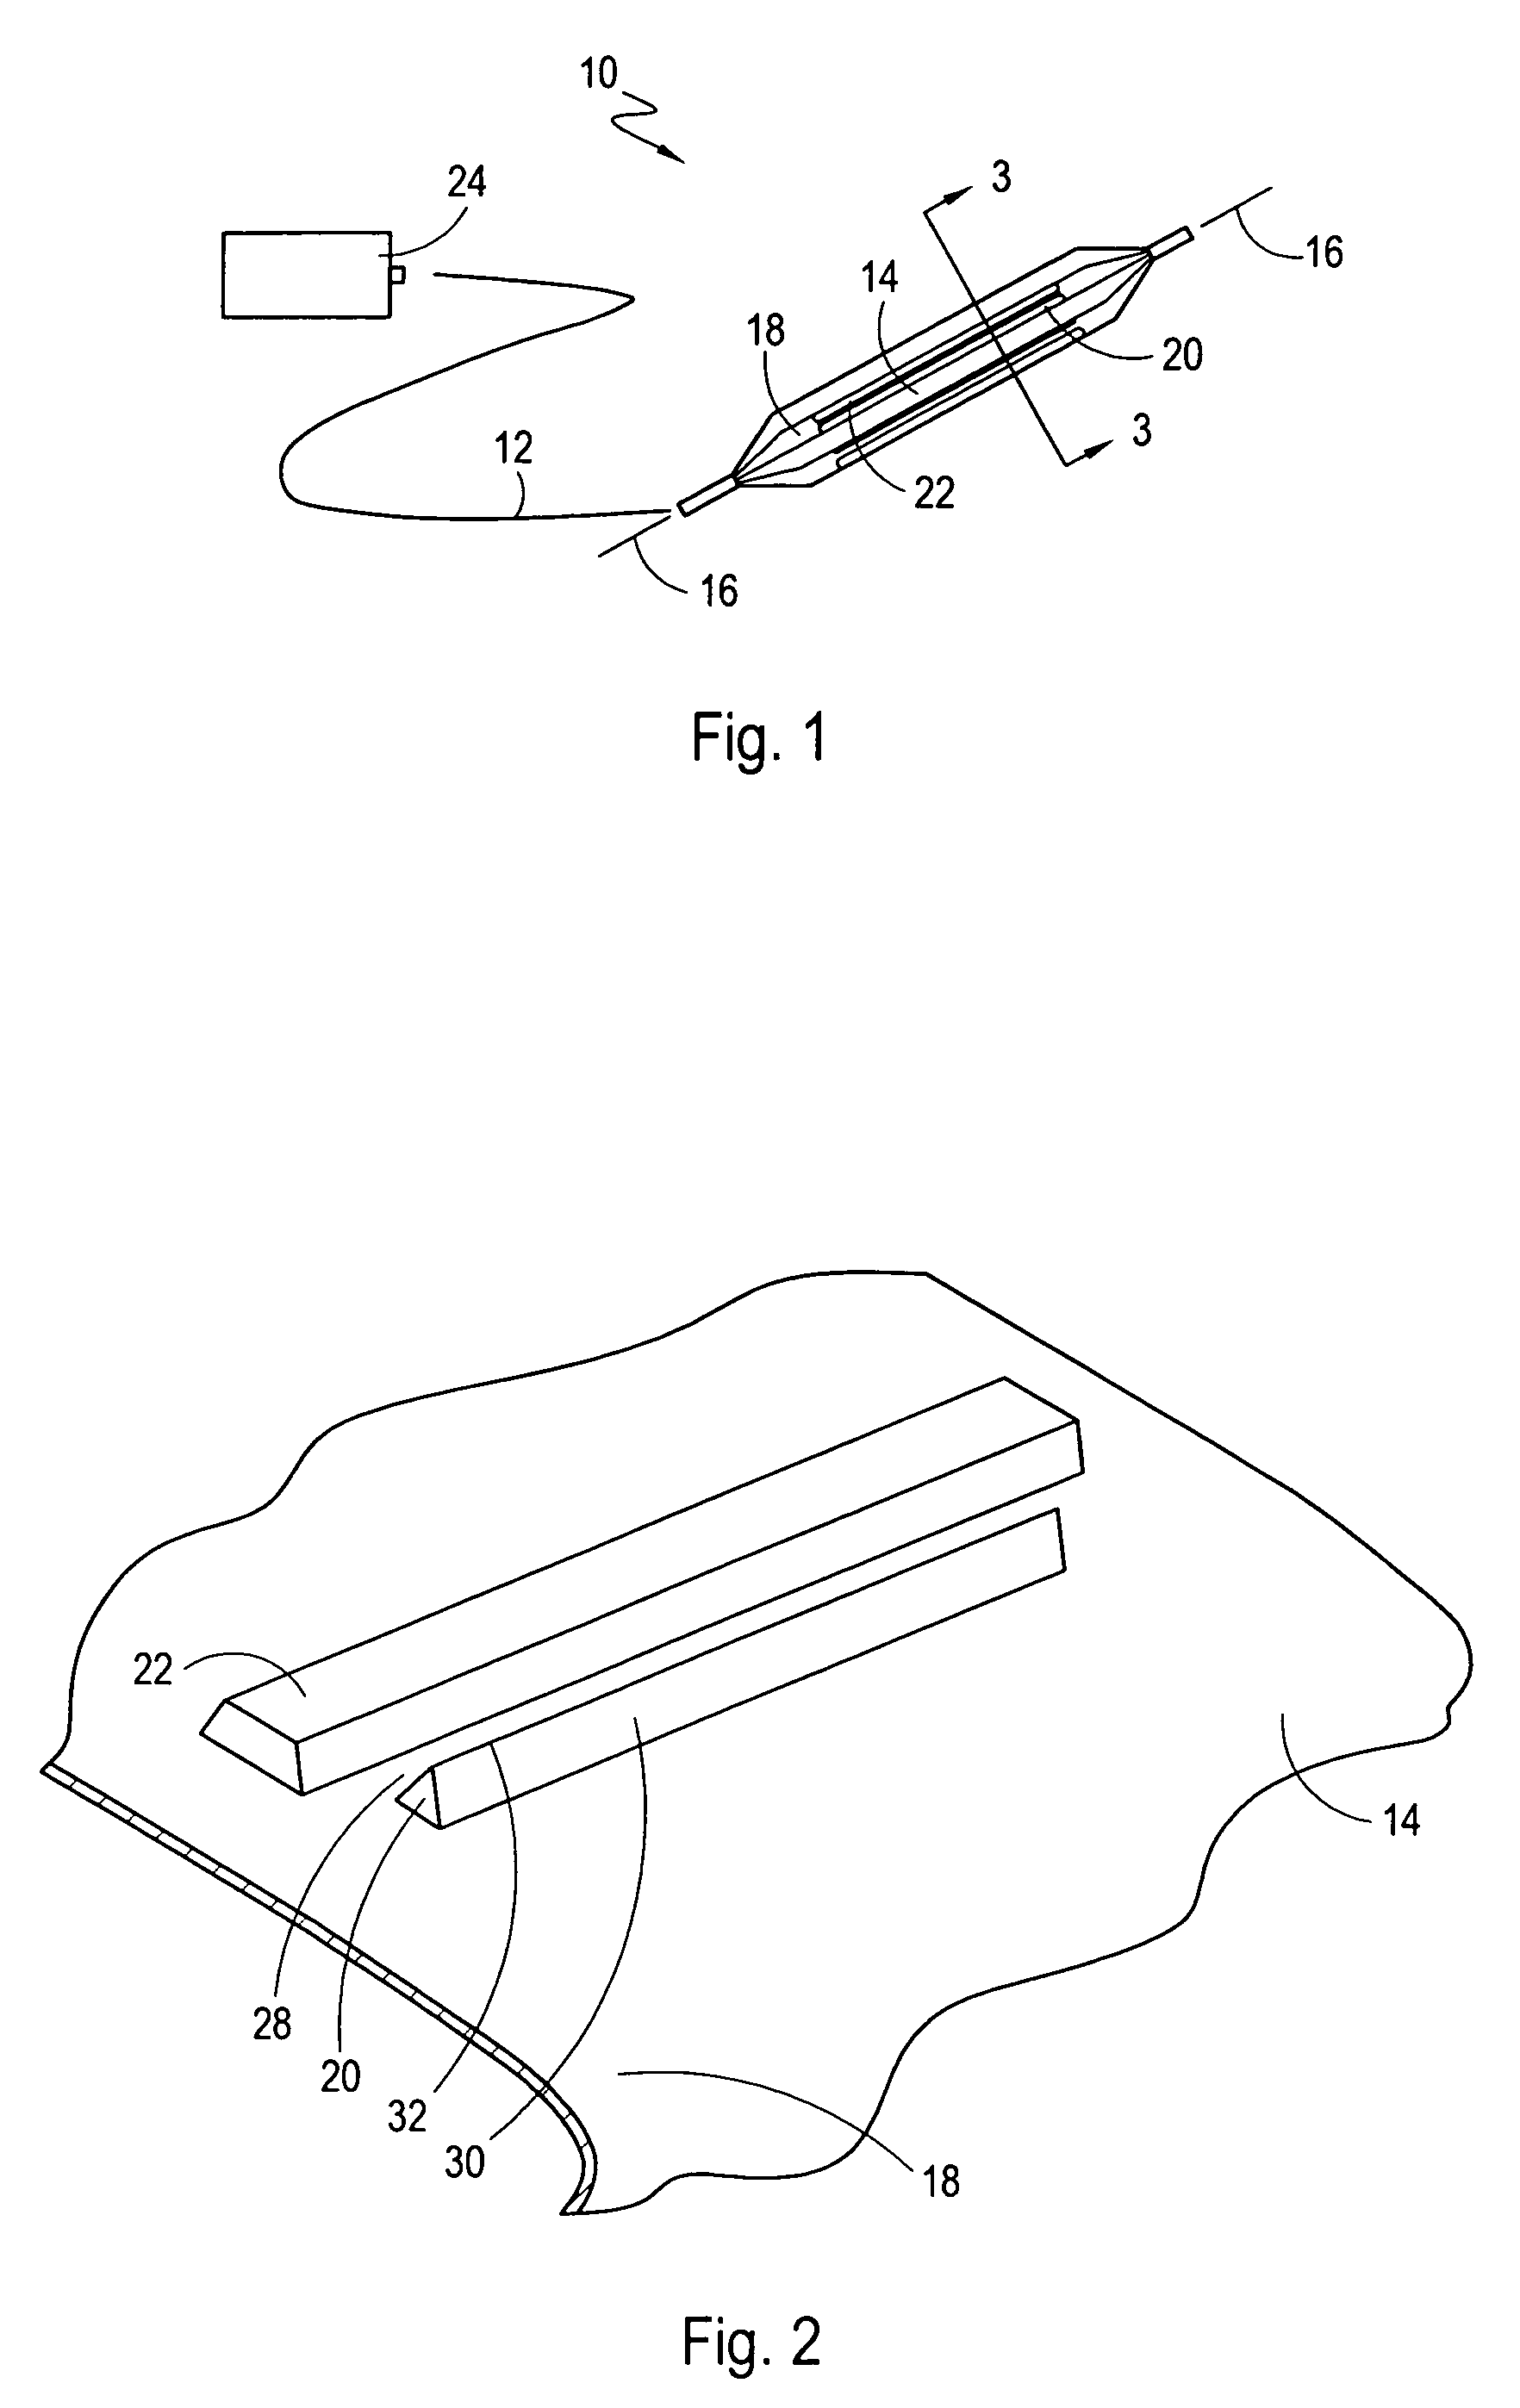 Microsurgical balloon with protective reinforcement